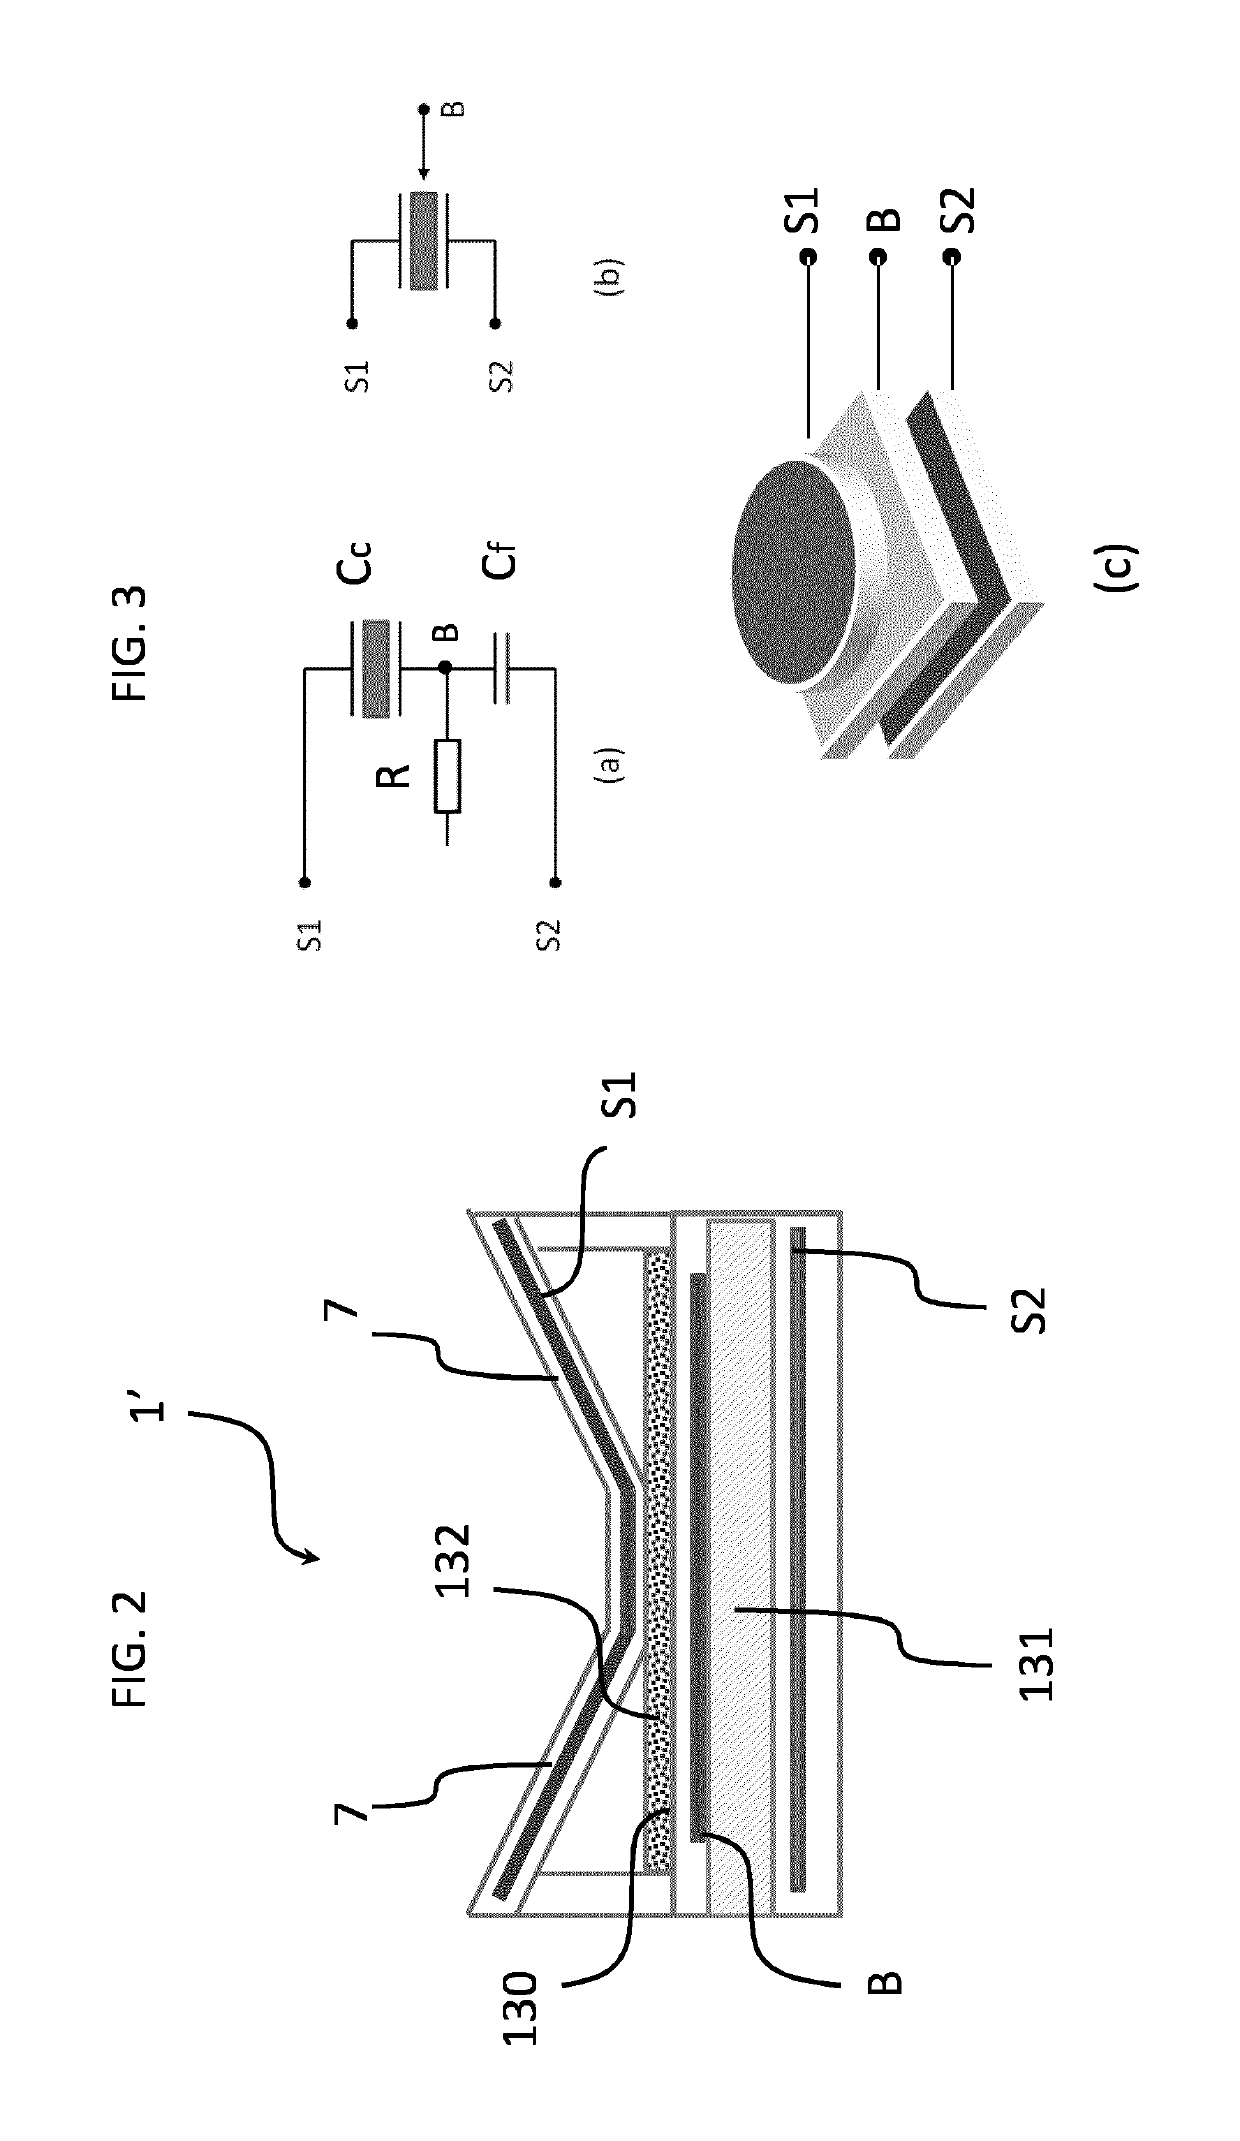 Monolithically integrated three electrode CMUT device